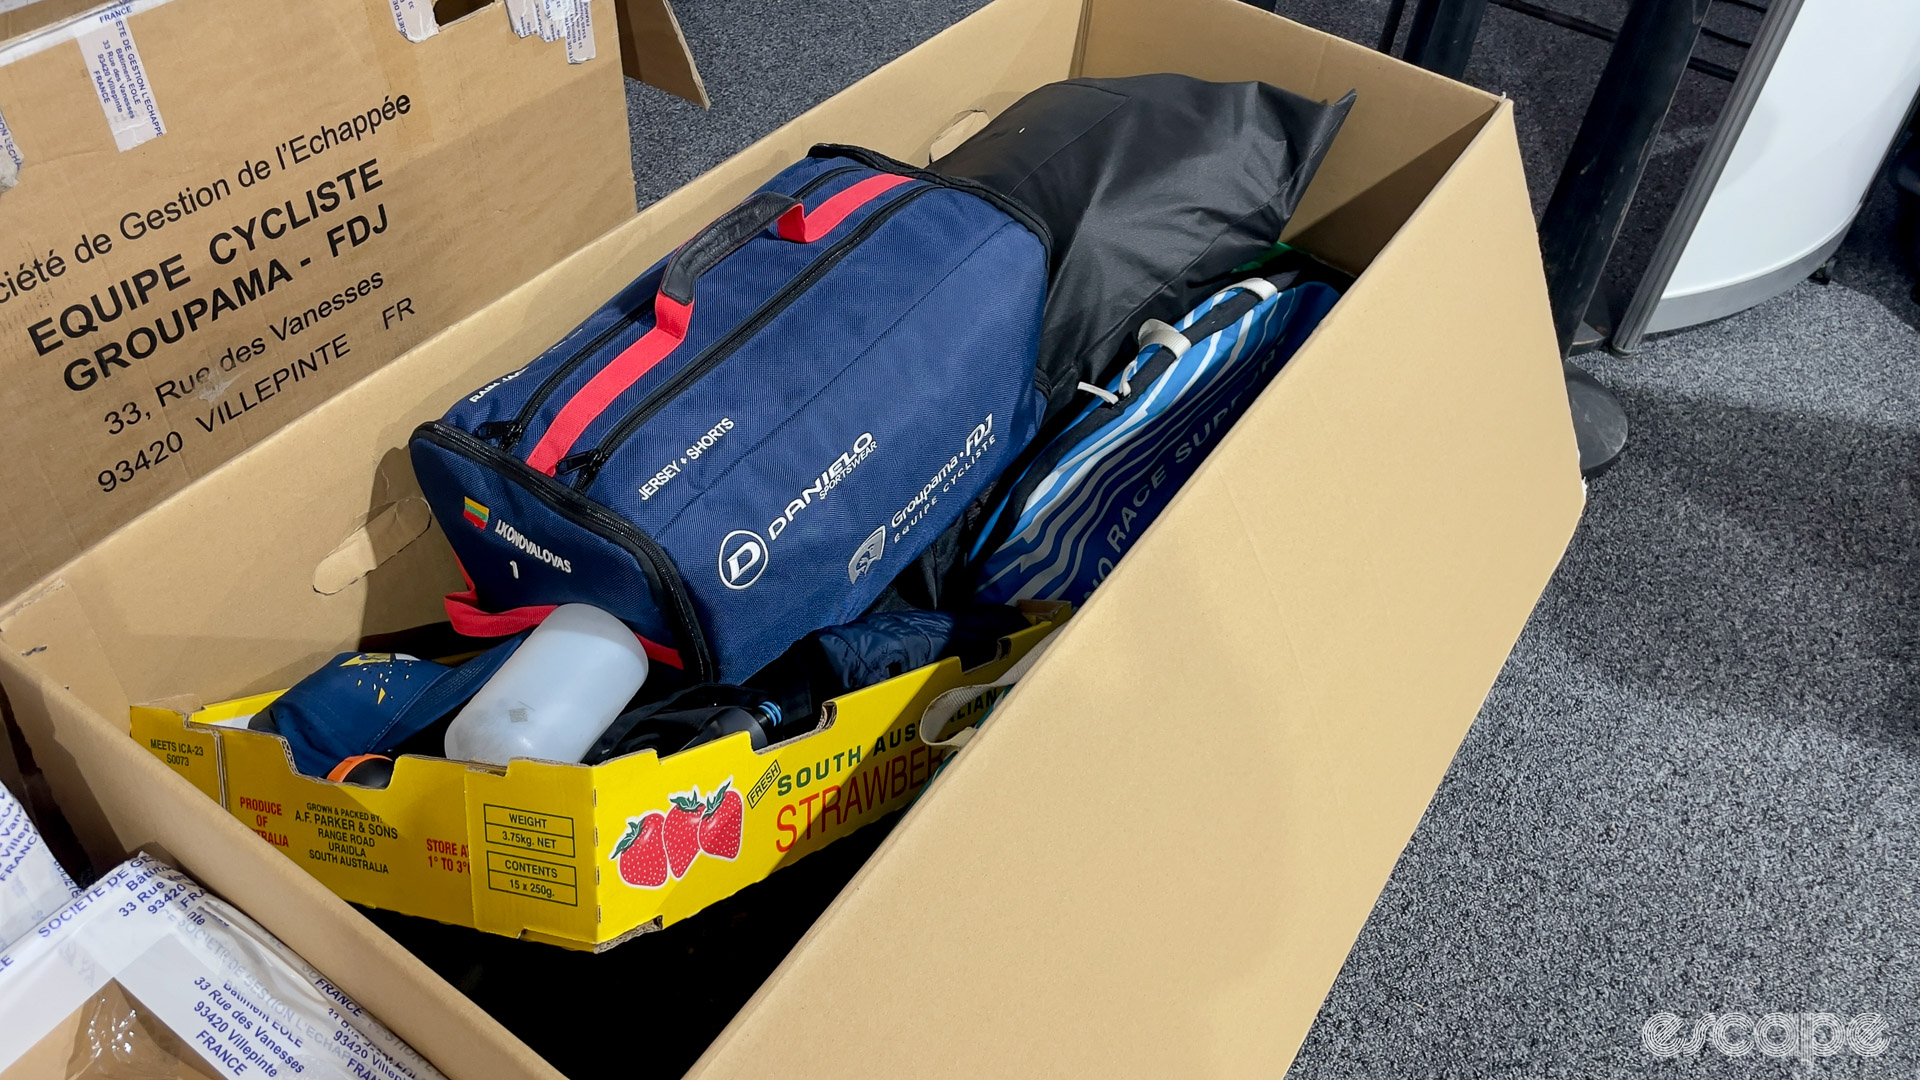 The photo shows a box almost full with various items.